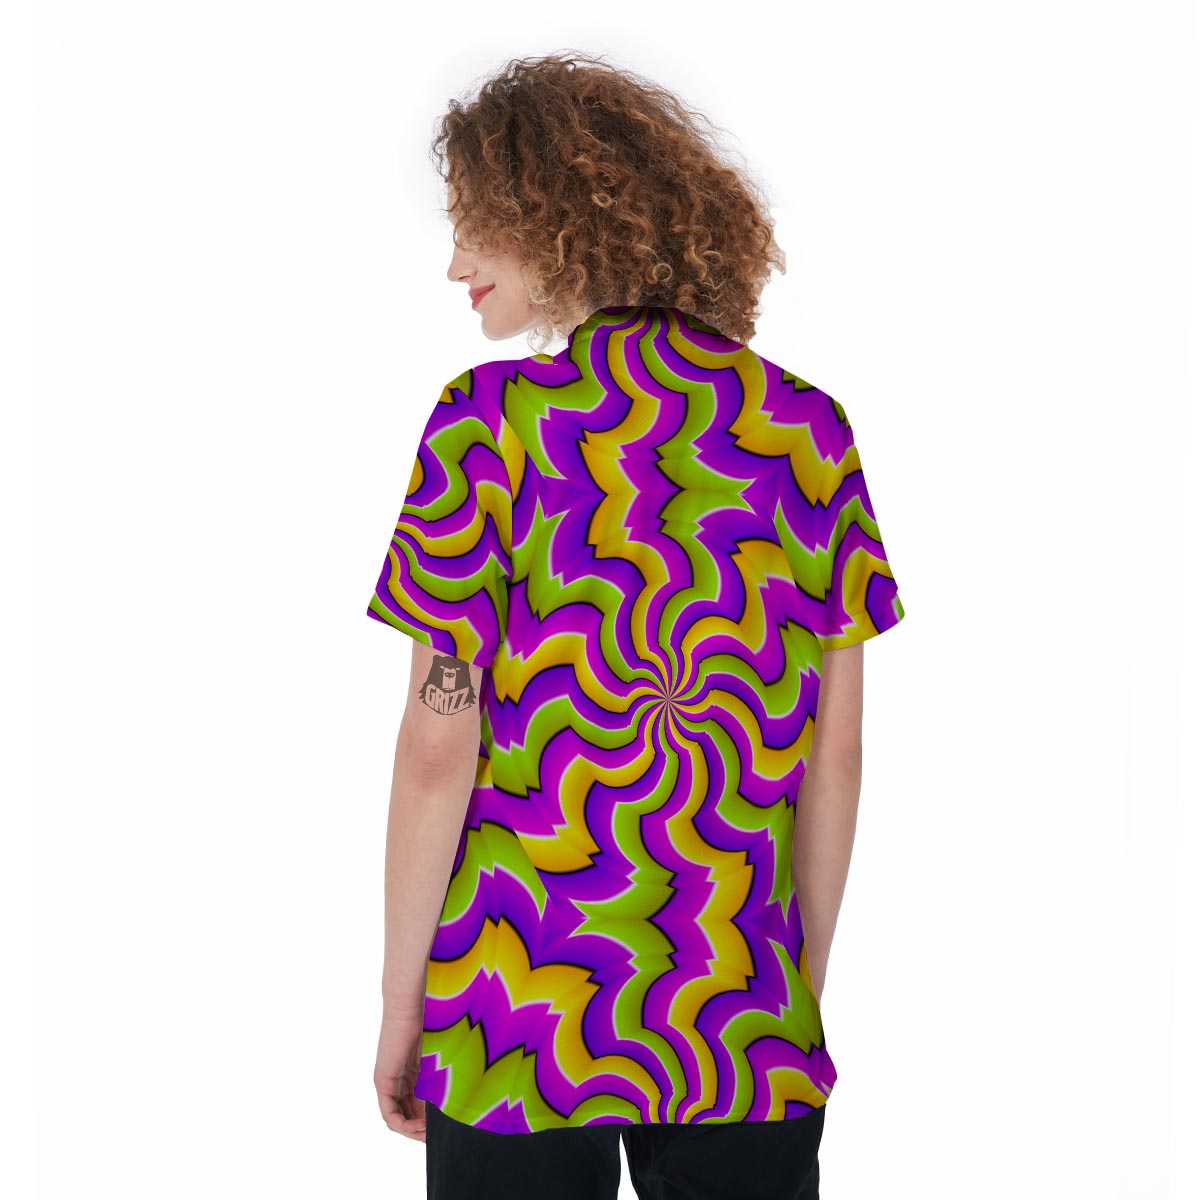 Zigzag Psychedelic Optical illusion Women's Golf Shirts-grizzshop